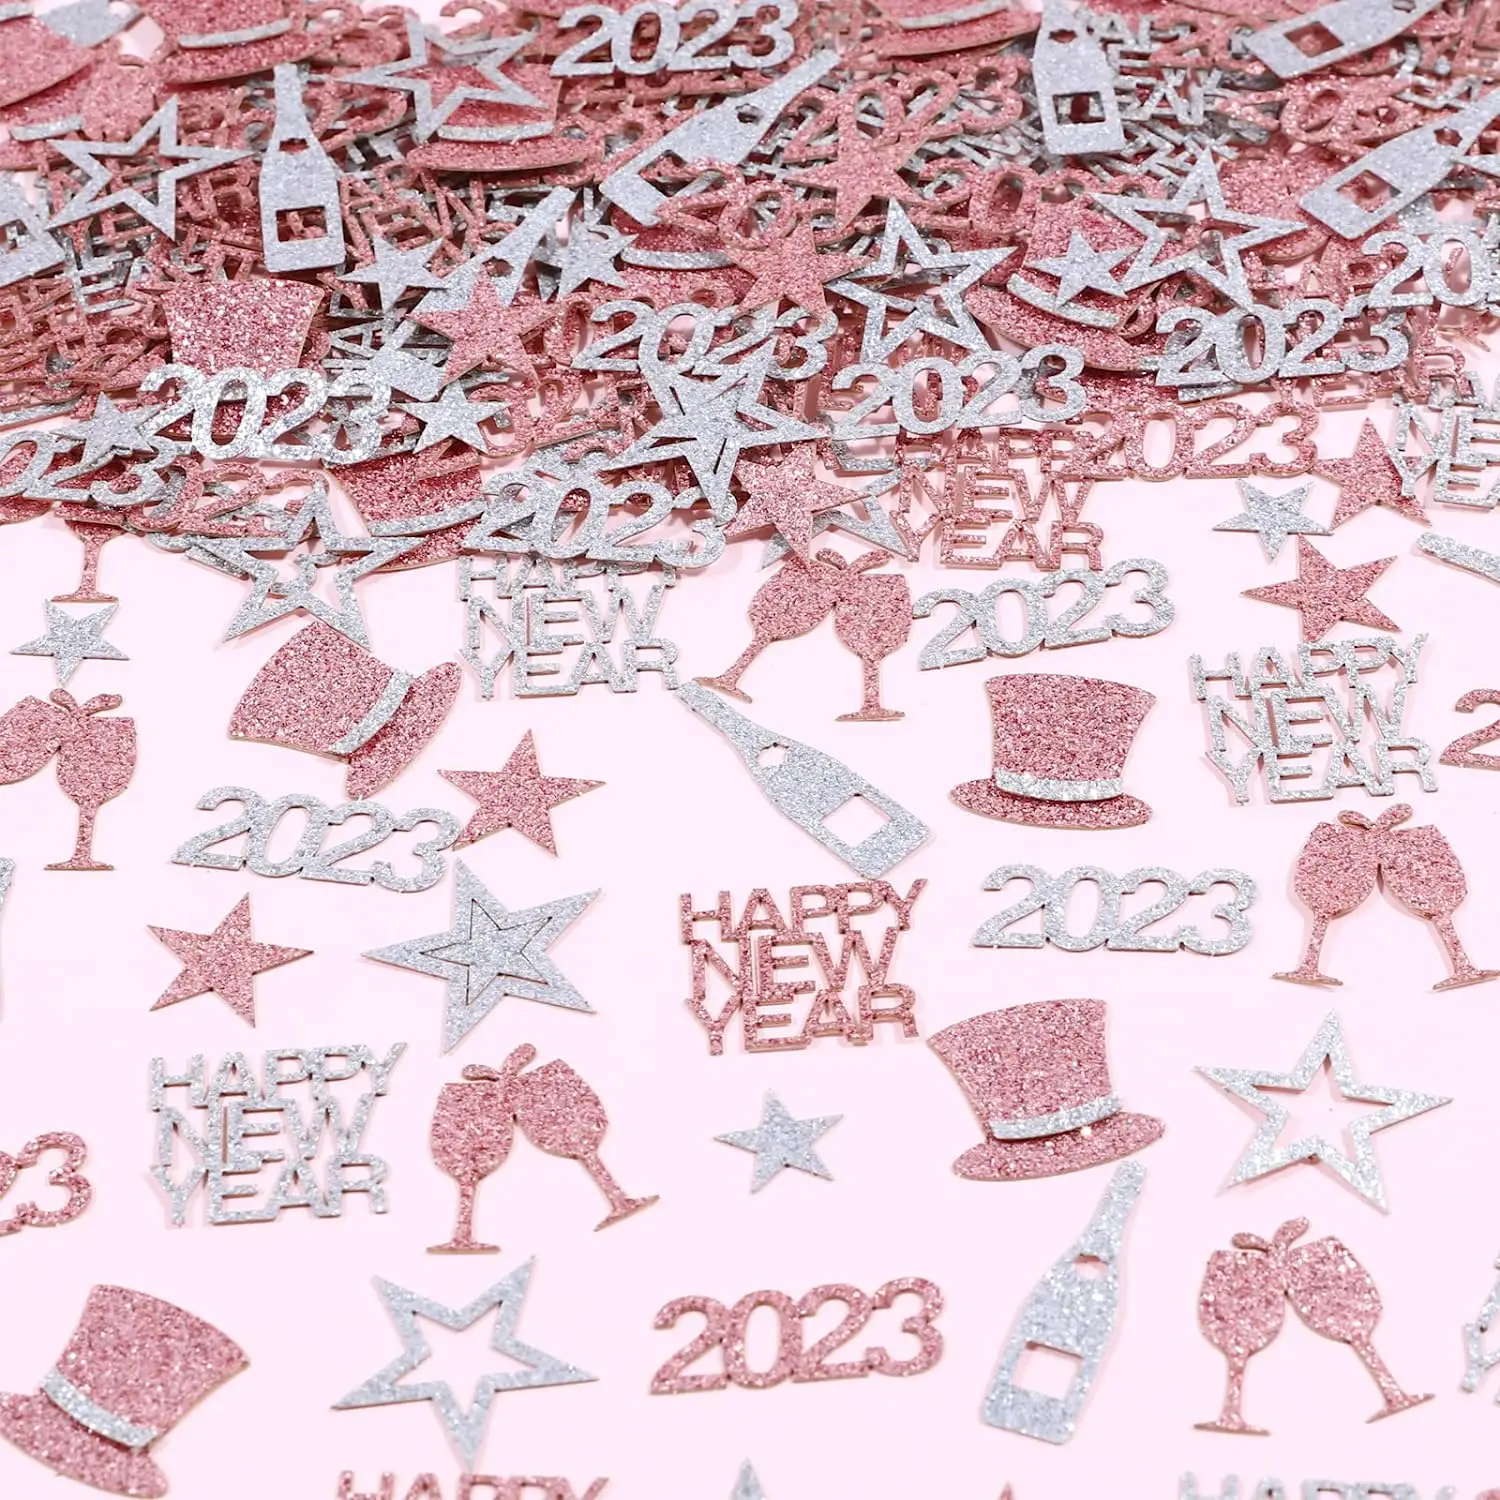 

Sursurprise 220pcs Rose Gold Silver Table Scatter Confetti 2023 Happy New Year Party Table Decorations New Years Eve Supplies